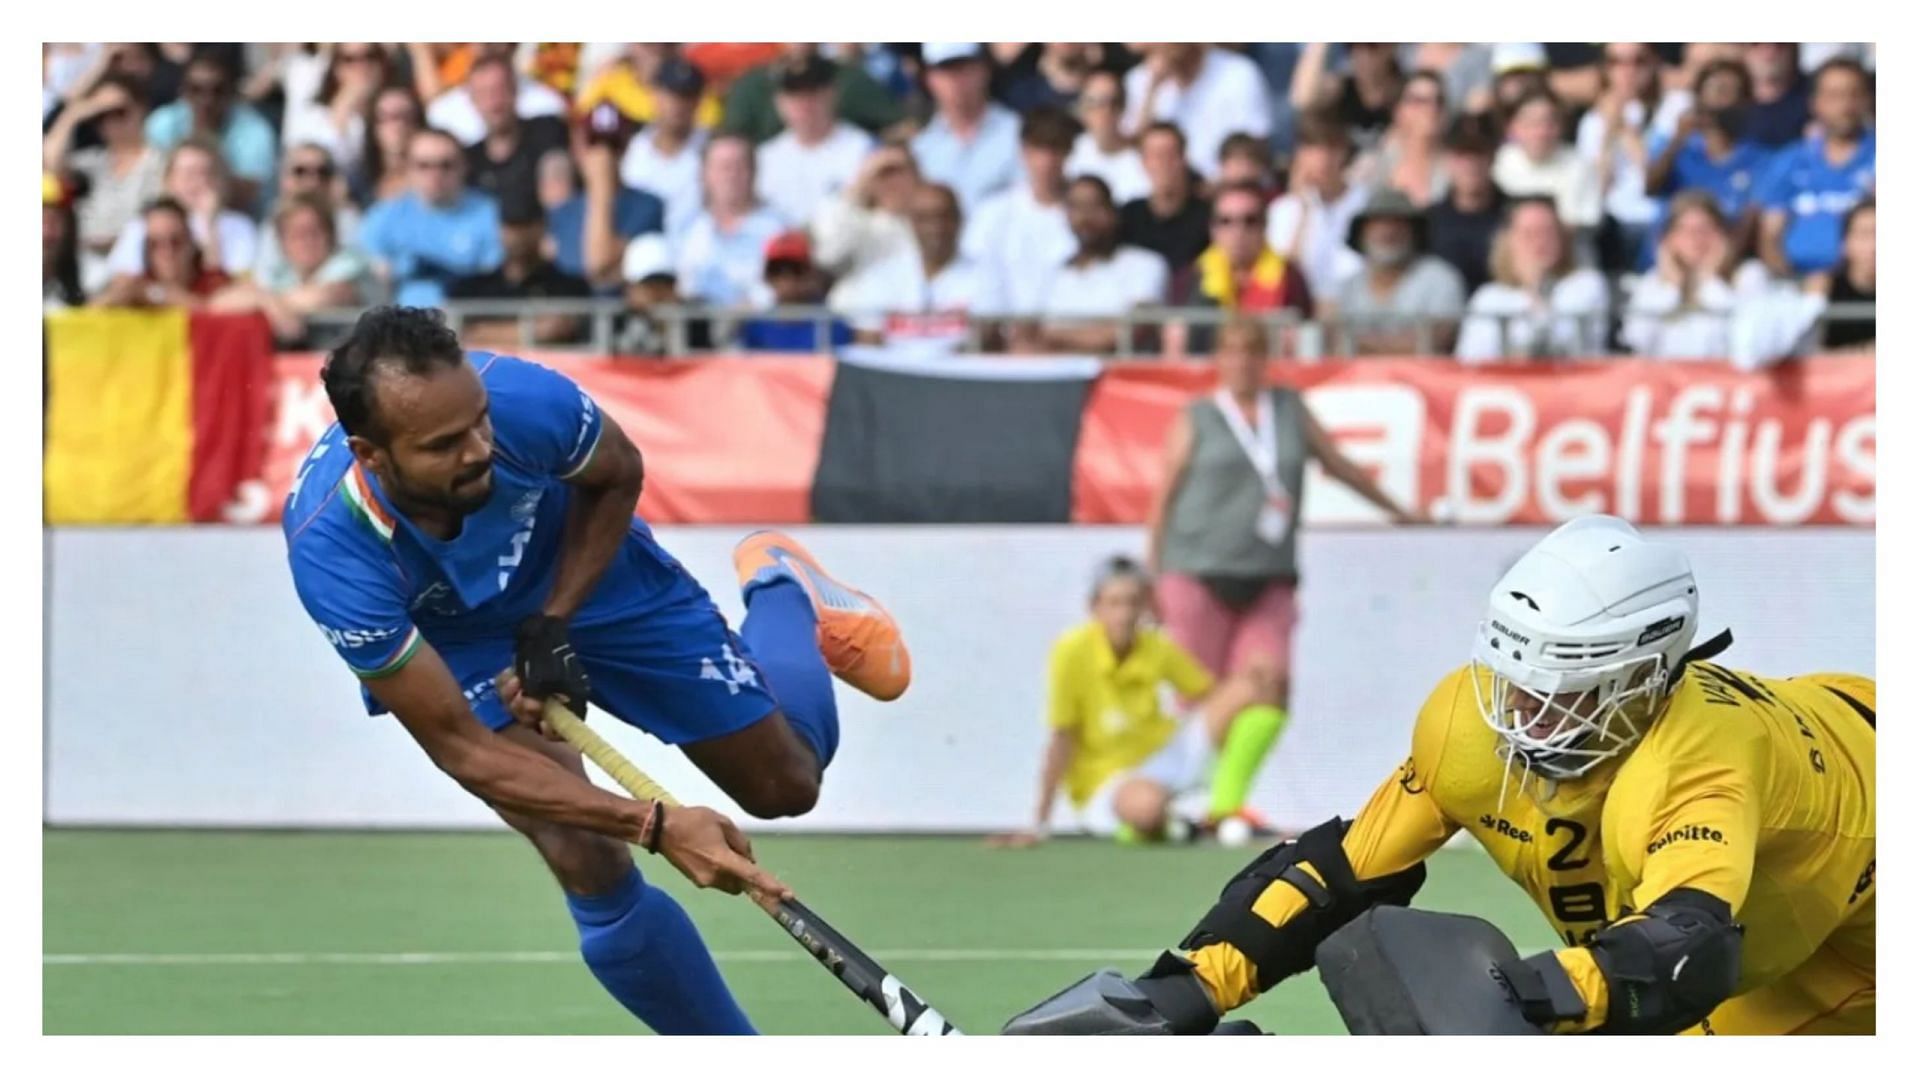 FIH Pro League 2021/22: Indian hockey forward Lalit Upadhyay in action (Pic Credit: Hockey India)